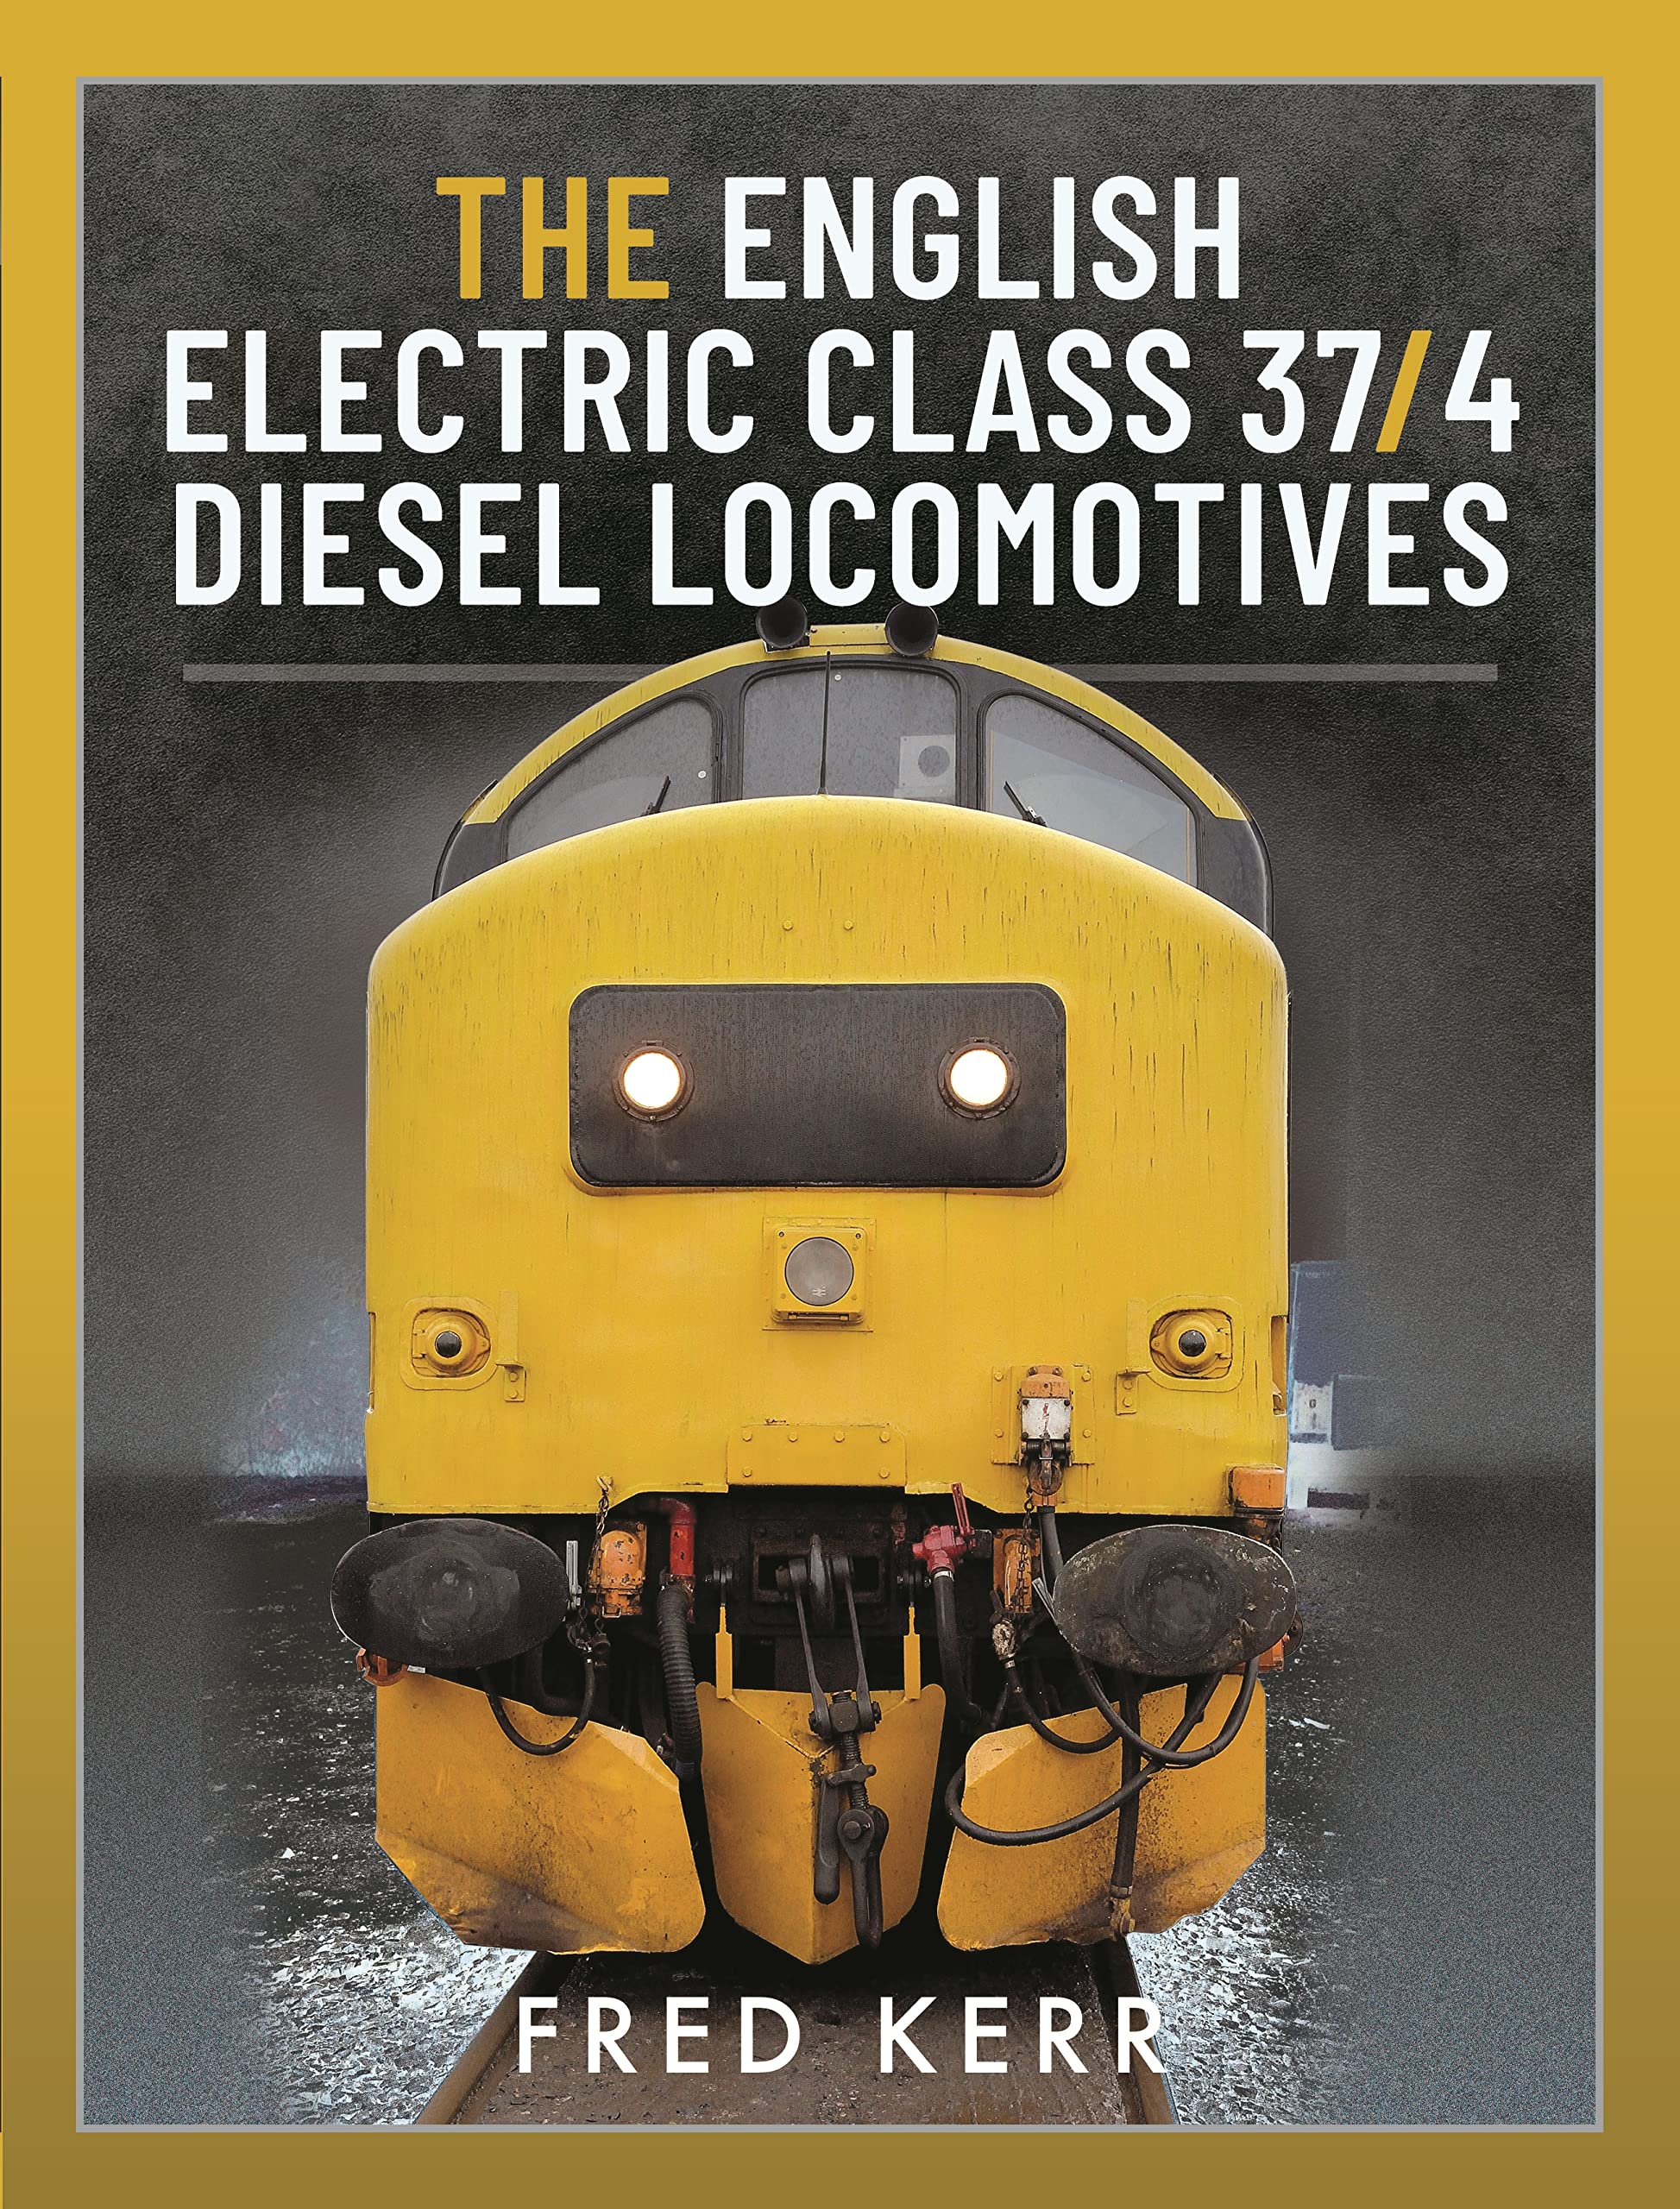 SAVE 20% RRP is £25.00 The English Electric Class 37/4 Diesel Locomotives